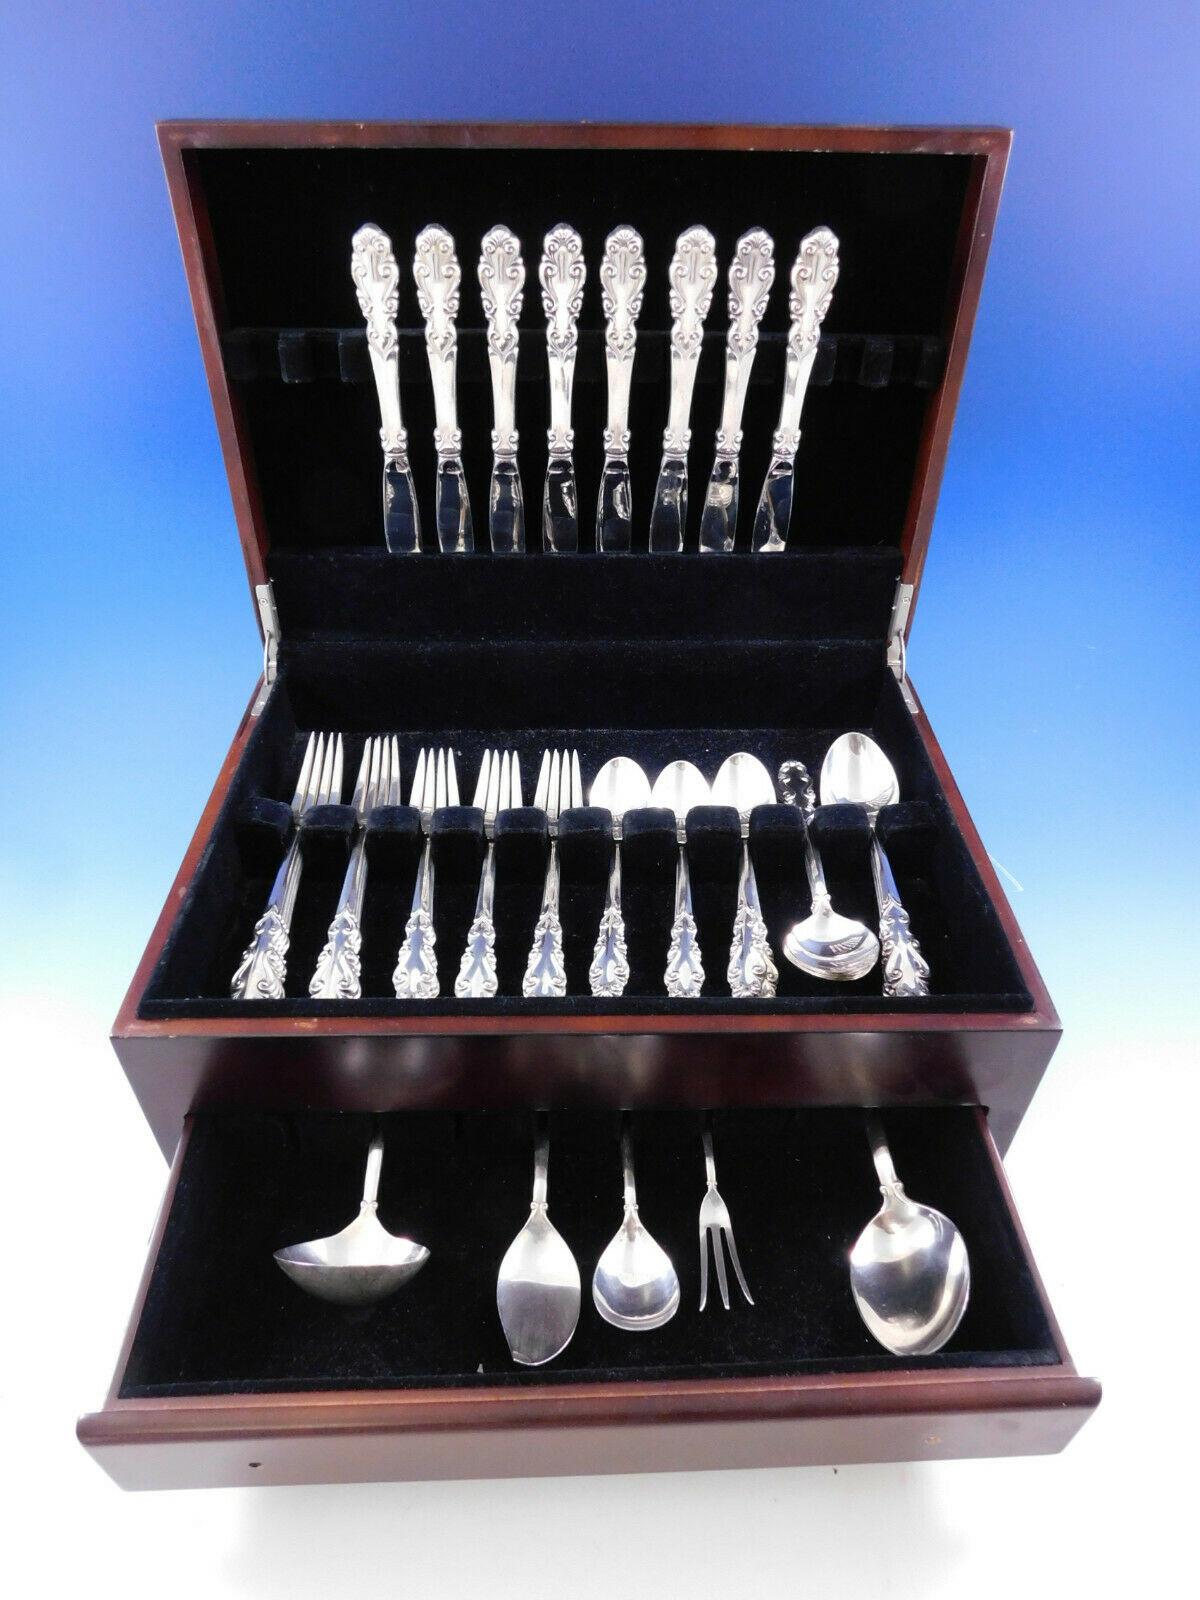 Esplanade by Towle sterling silver flatware set, 45 pieces. This set includes:

8 knives, 8 7/8